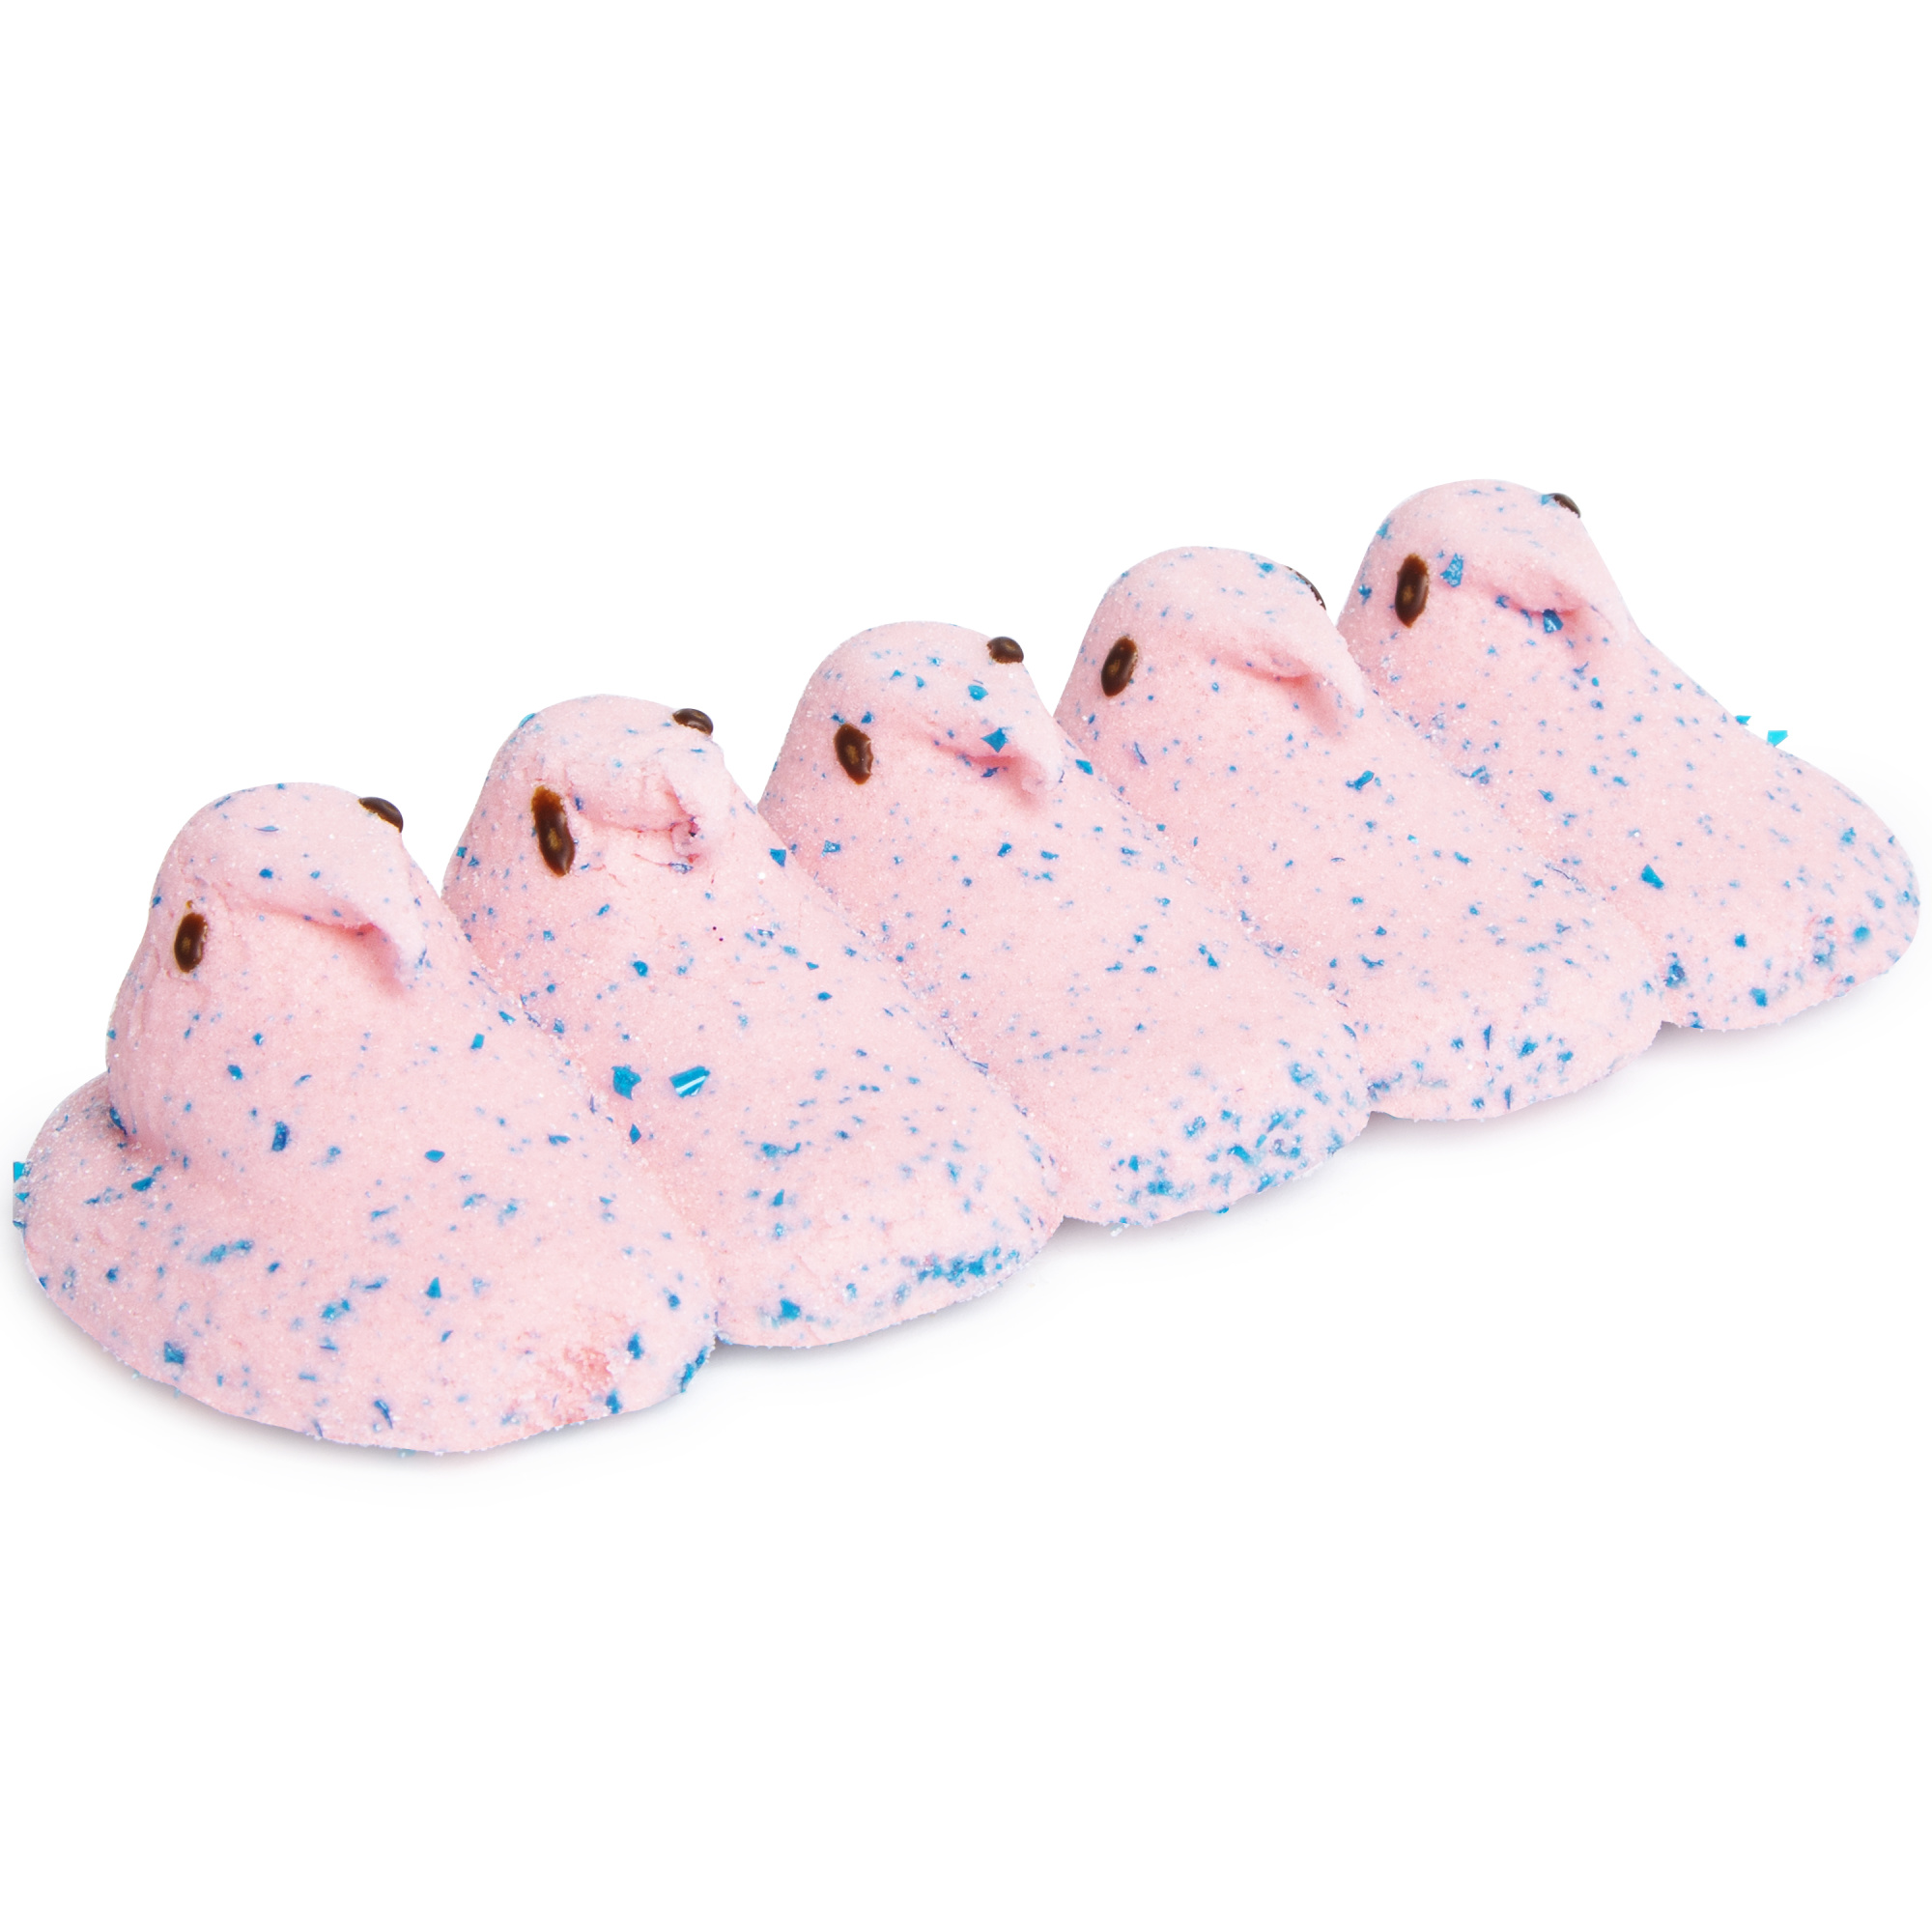 cotton candy peeps marshmallow chicks 5-count